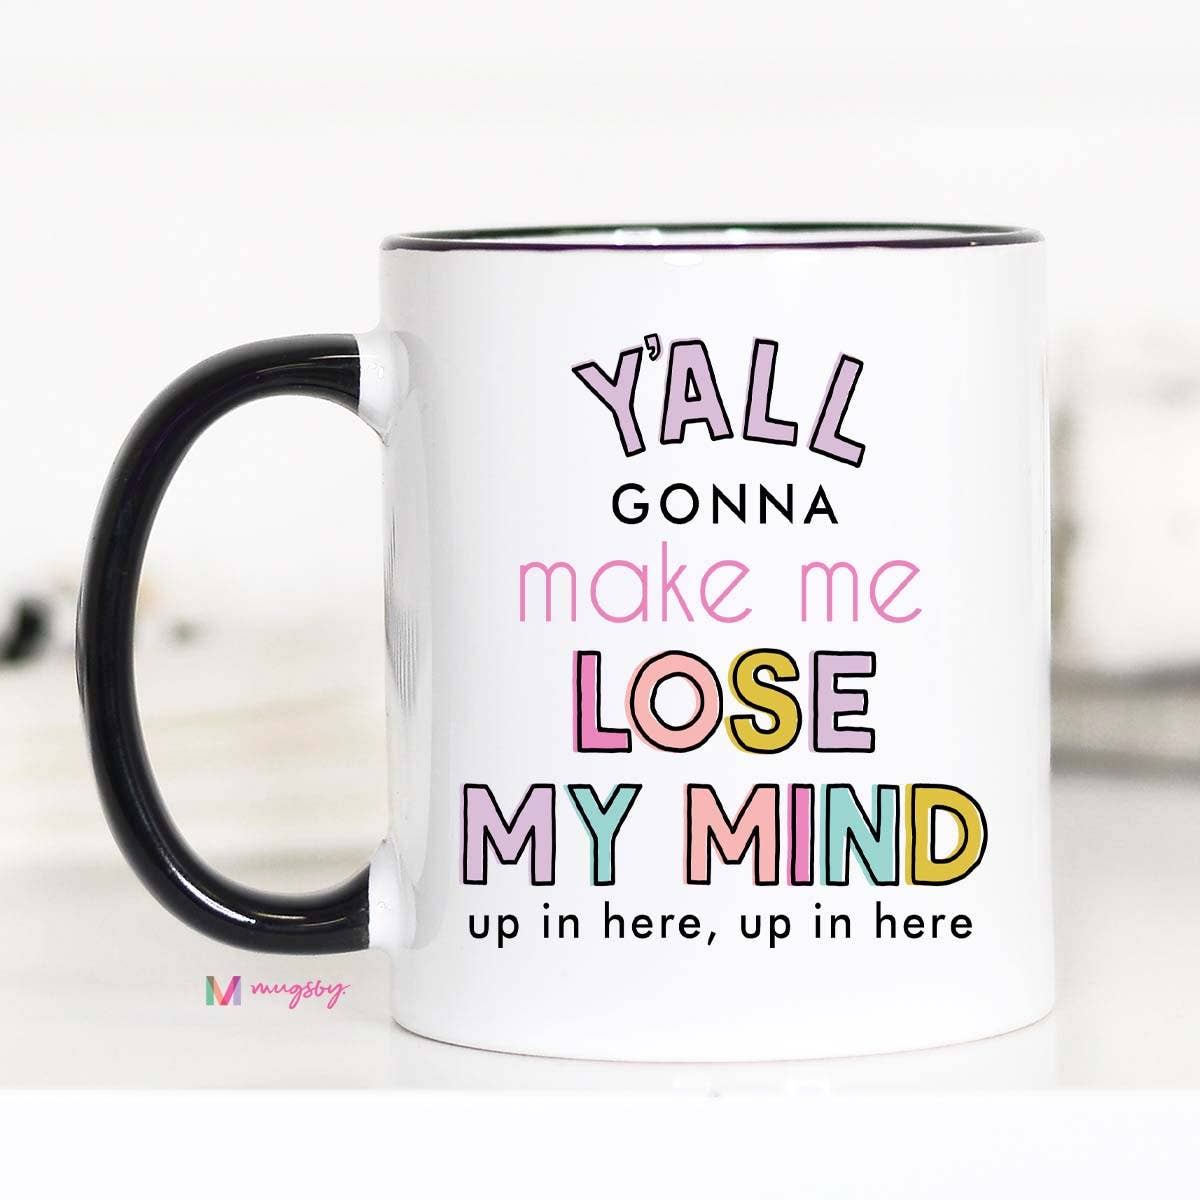 Y'all Gonna Make me Lose my Mind Coffee Mug, Teacher gifts - Storm and Sky Shoppe - Mugsby